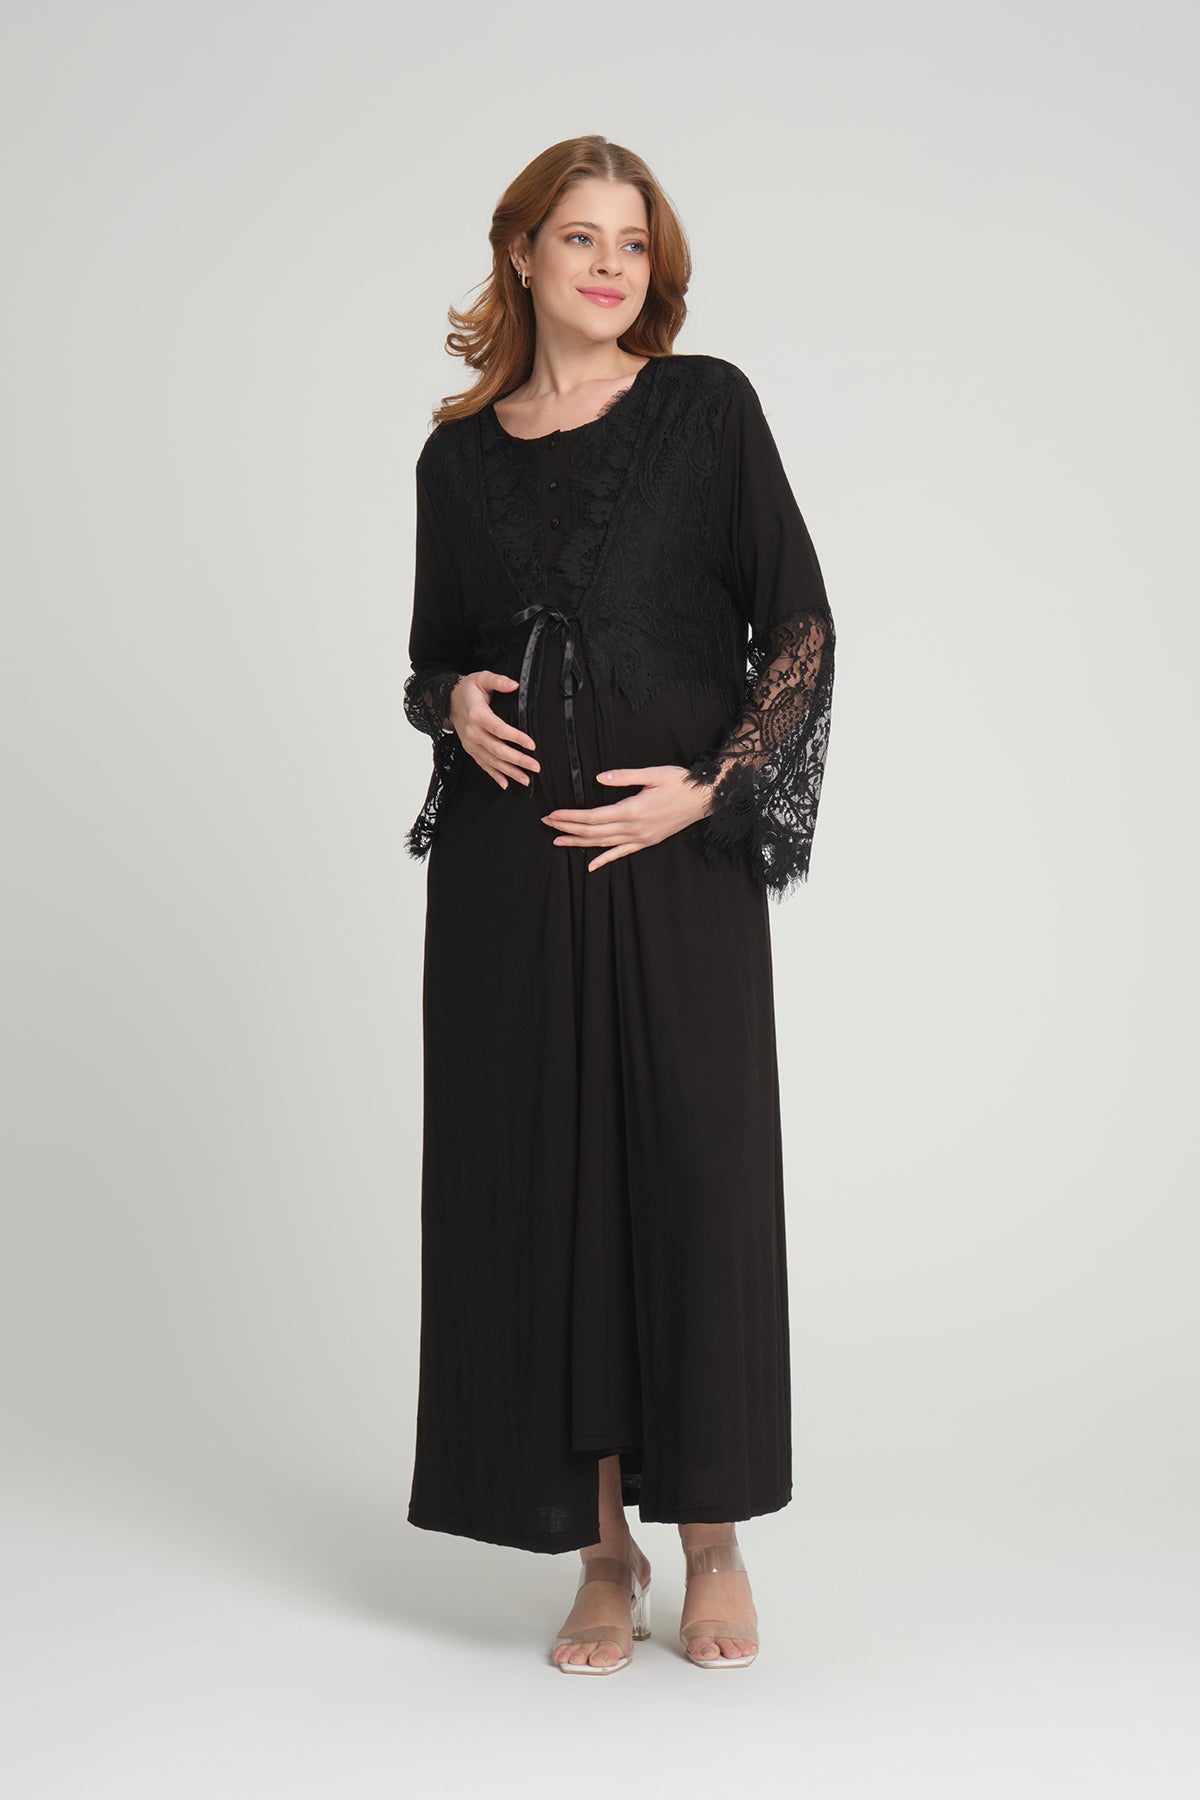 Lace Maternity & Nursing Nightgown With Lace Sleeve Robe Black - 202